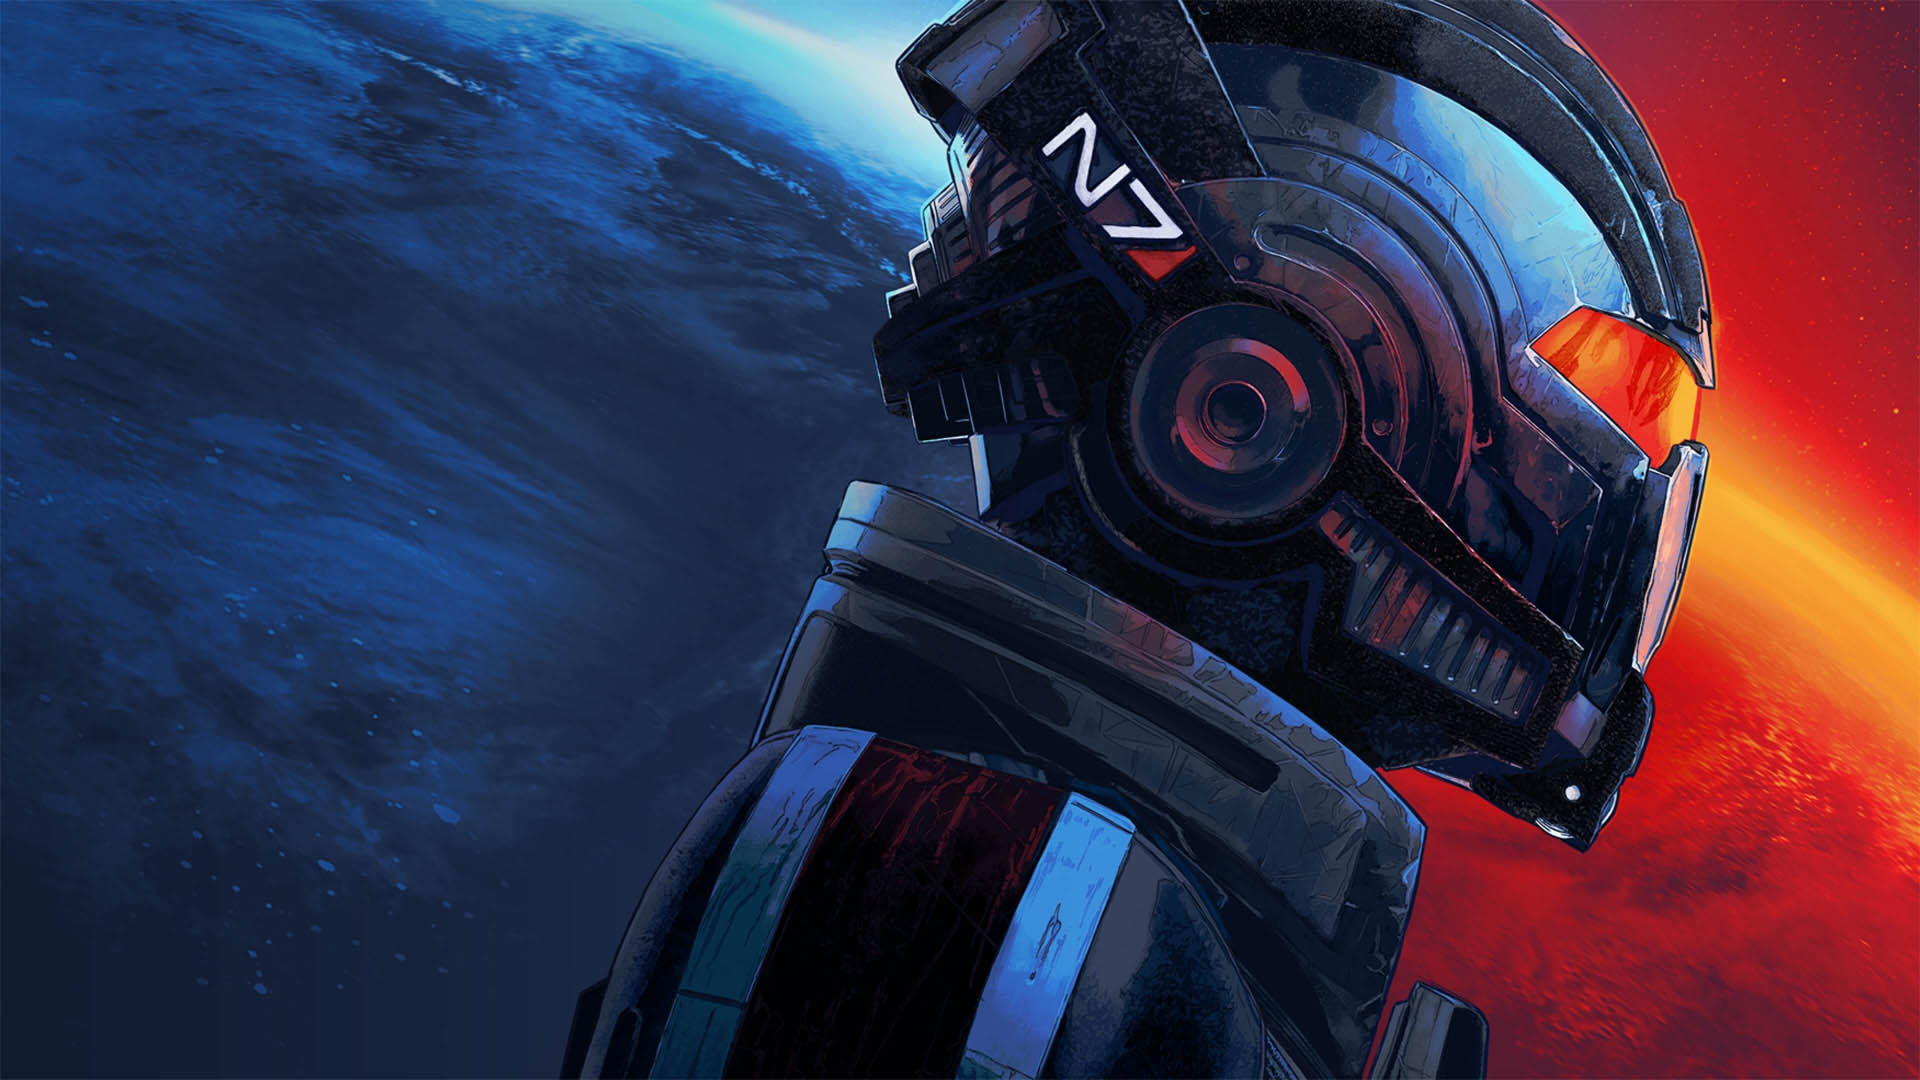 A teaser for the latest work in the “Mass Effect” series released in conjunction with the “N7 Days 2023” community event